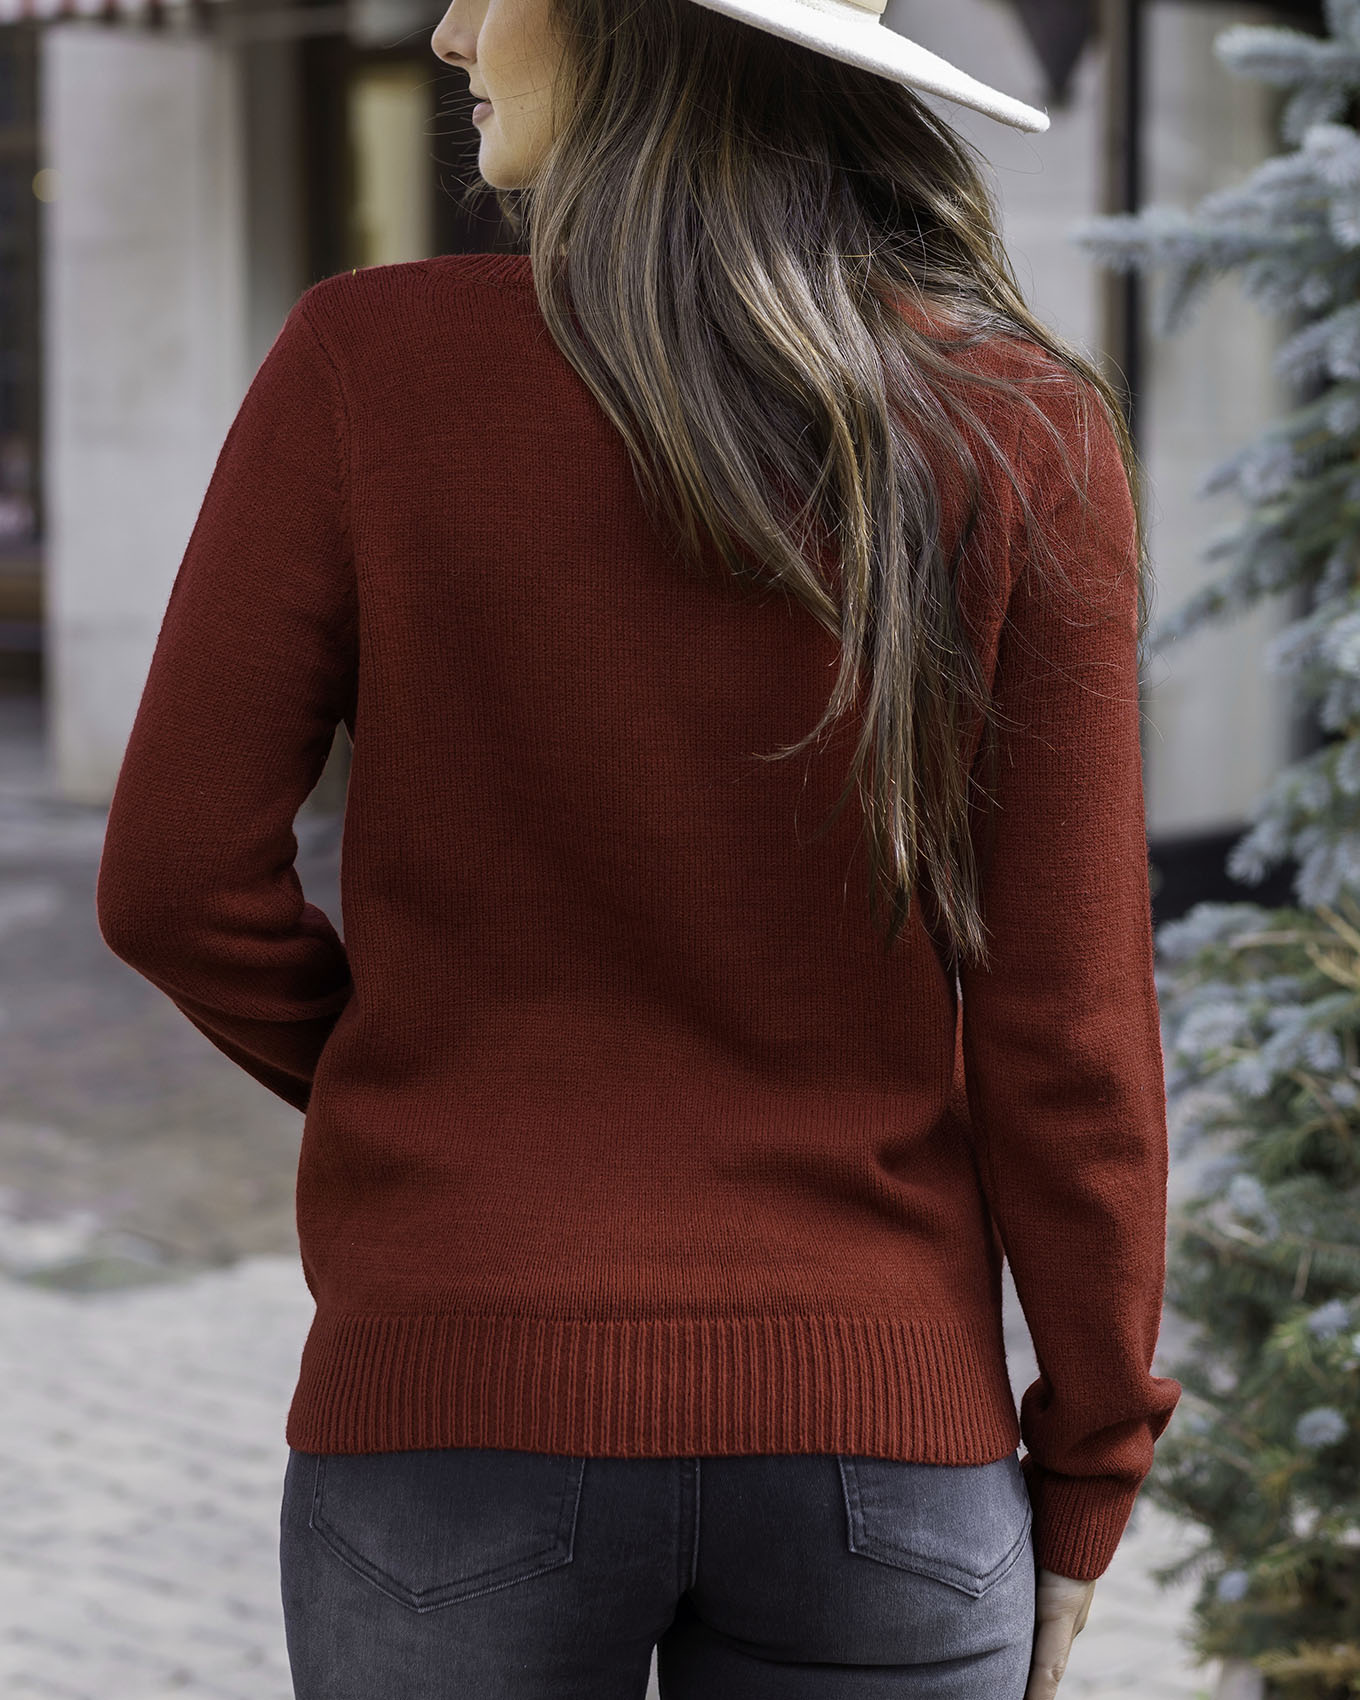 Back view of Merry Red Holiday Sweater